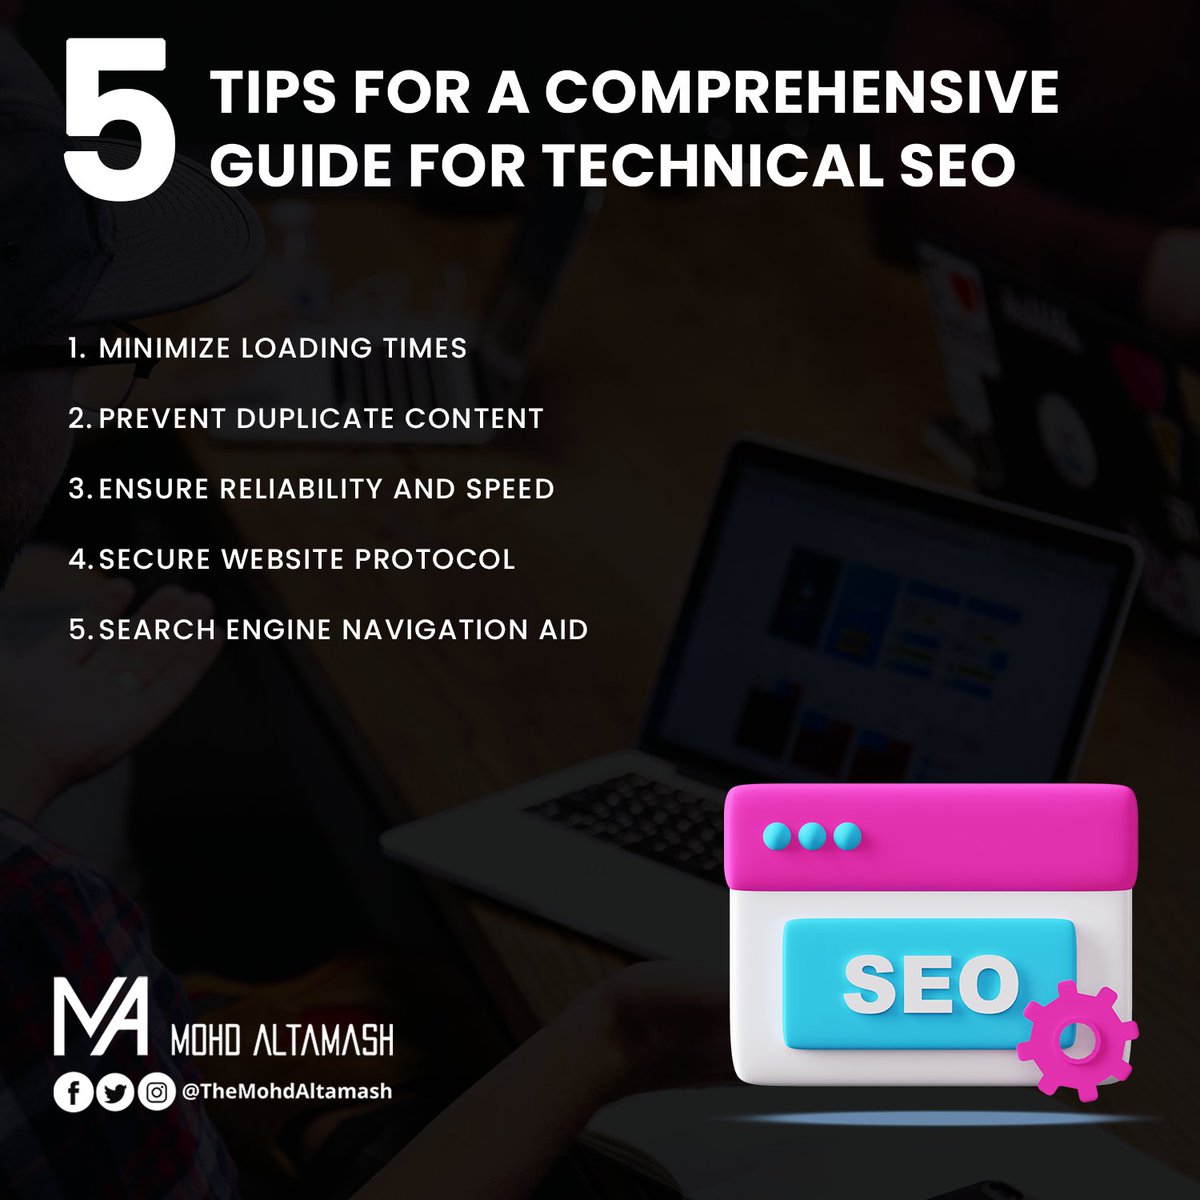 A comprehensive guide to technical SEO covers a wide range of factors and best practices that can help improve your website's search engine rankings and overall performance.

#TechnicalSEO #SEOStrategy #SearchEngineOptimization #WebsiteOptimization #SEOBestPractices #SEOTips